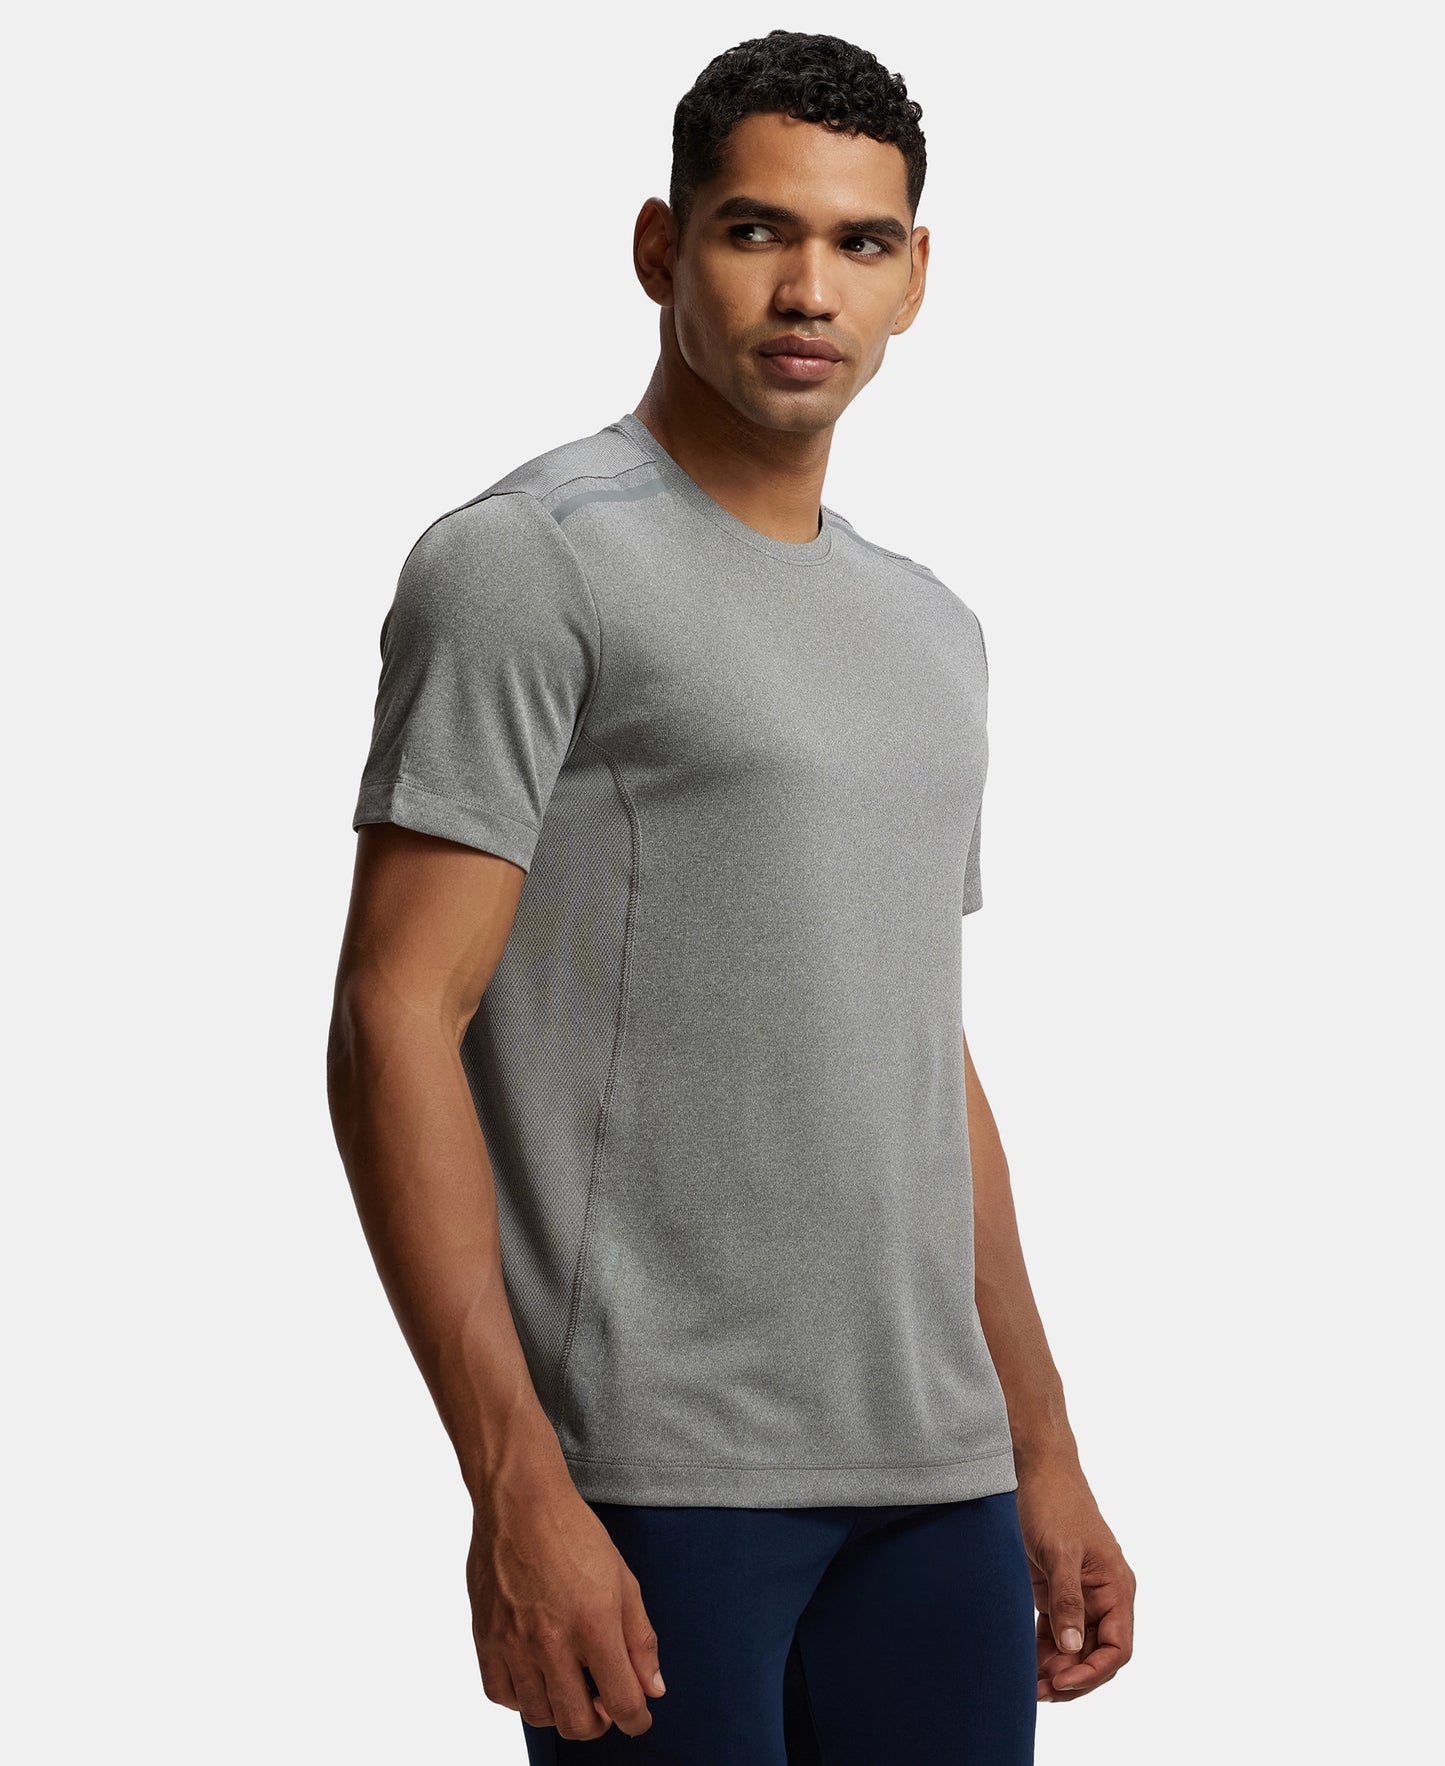 Recycled Microfiber Elastane Stretch Half Sleeve Round Neck T-Shirt with Breathable Mesh - Quiet Shade-2